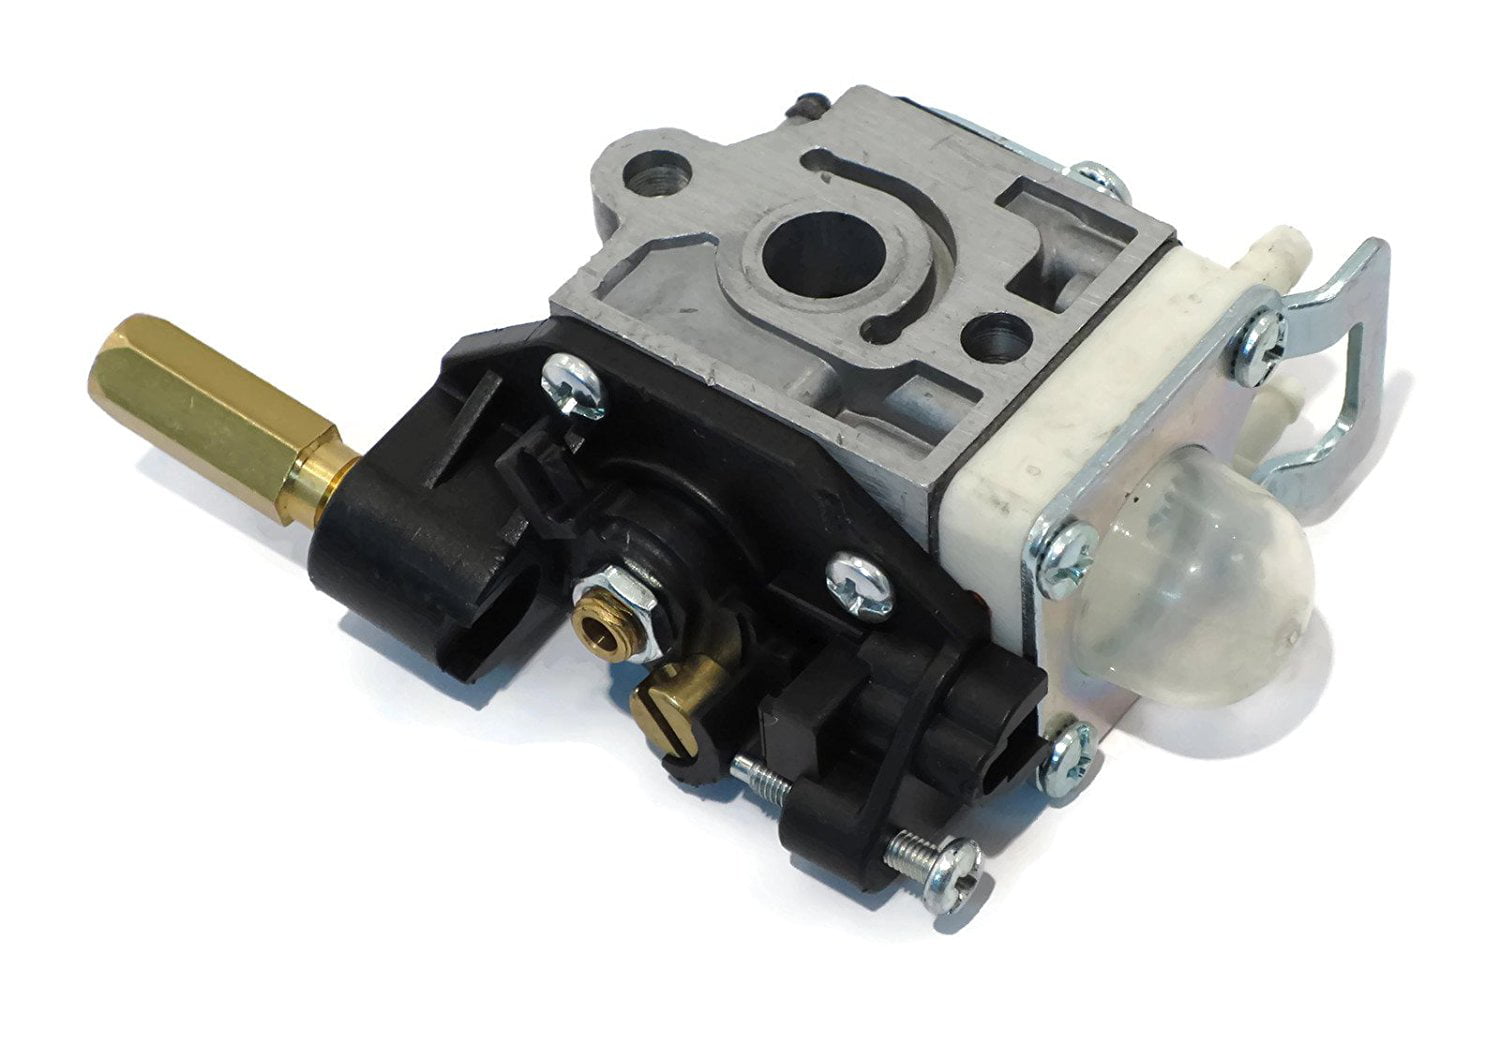 Replacement for Carburetor RB-K75 Fits GT-200 HC-150 SRM-210 And Many More 